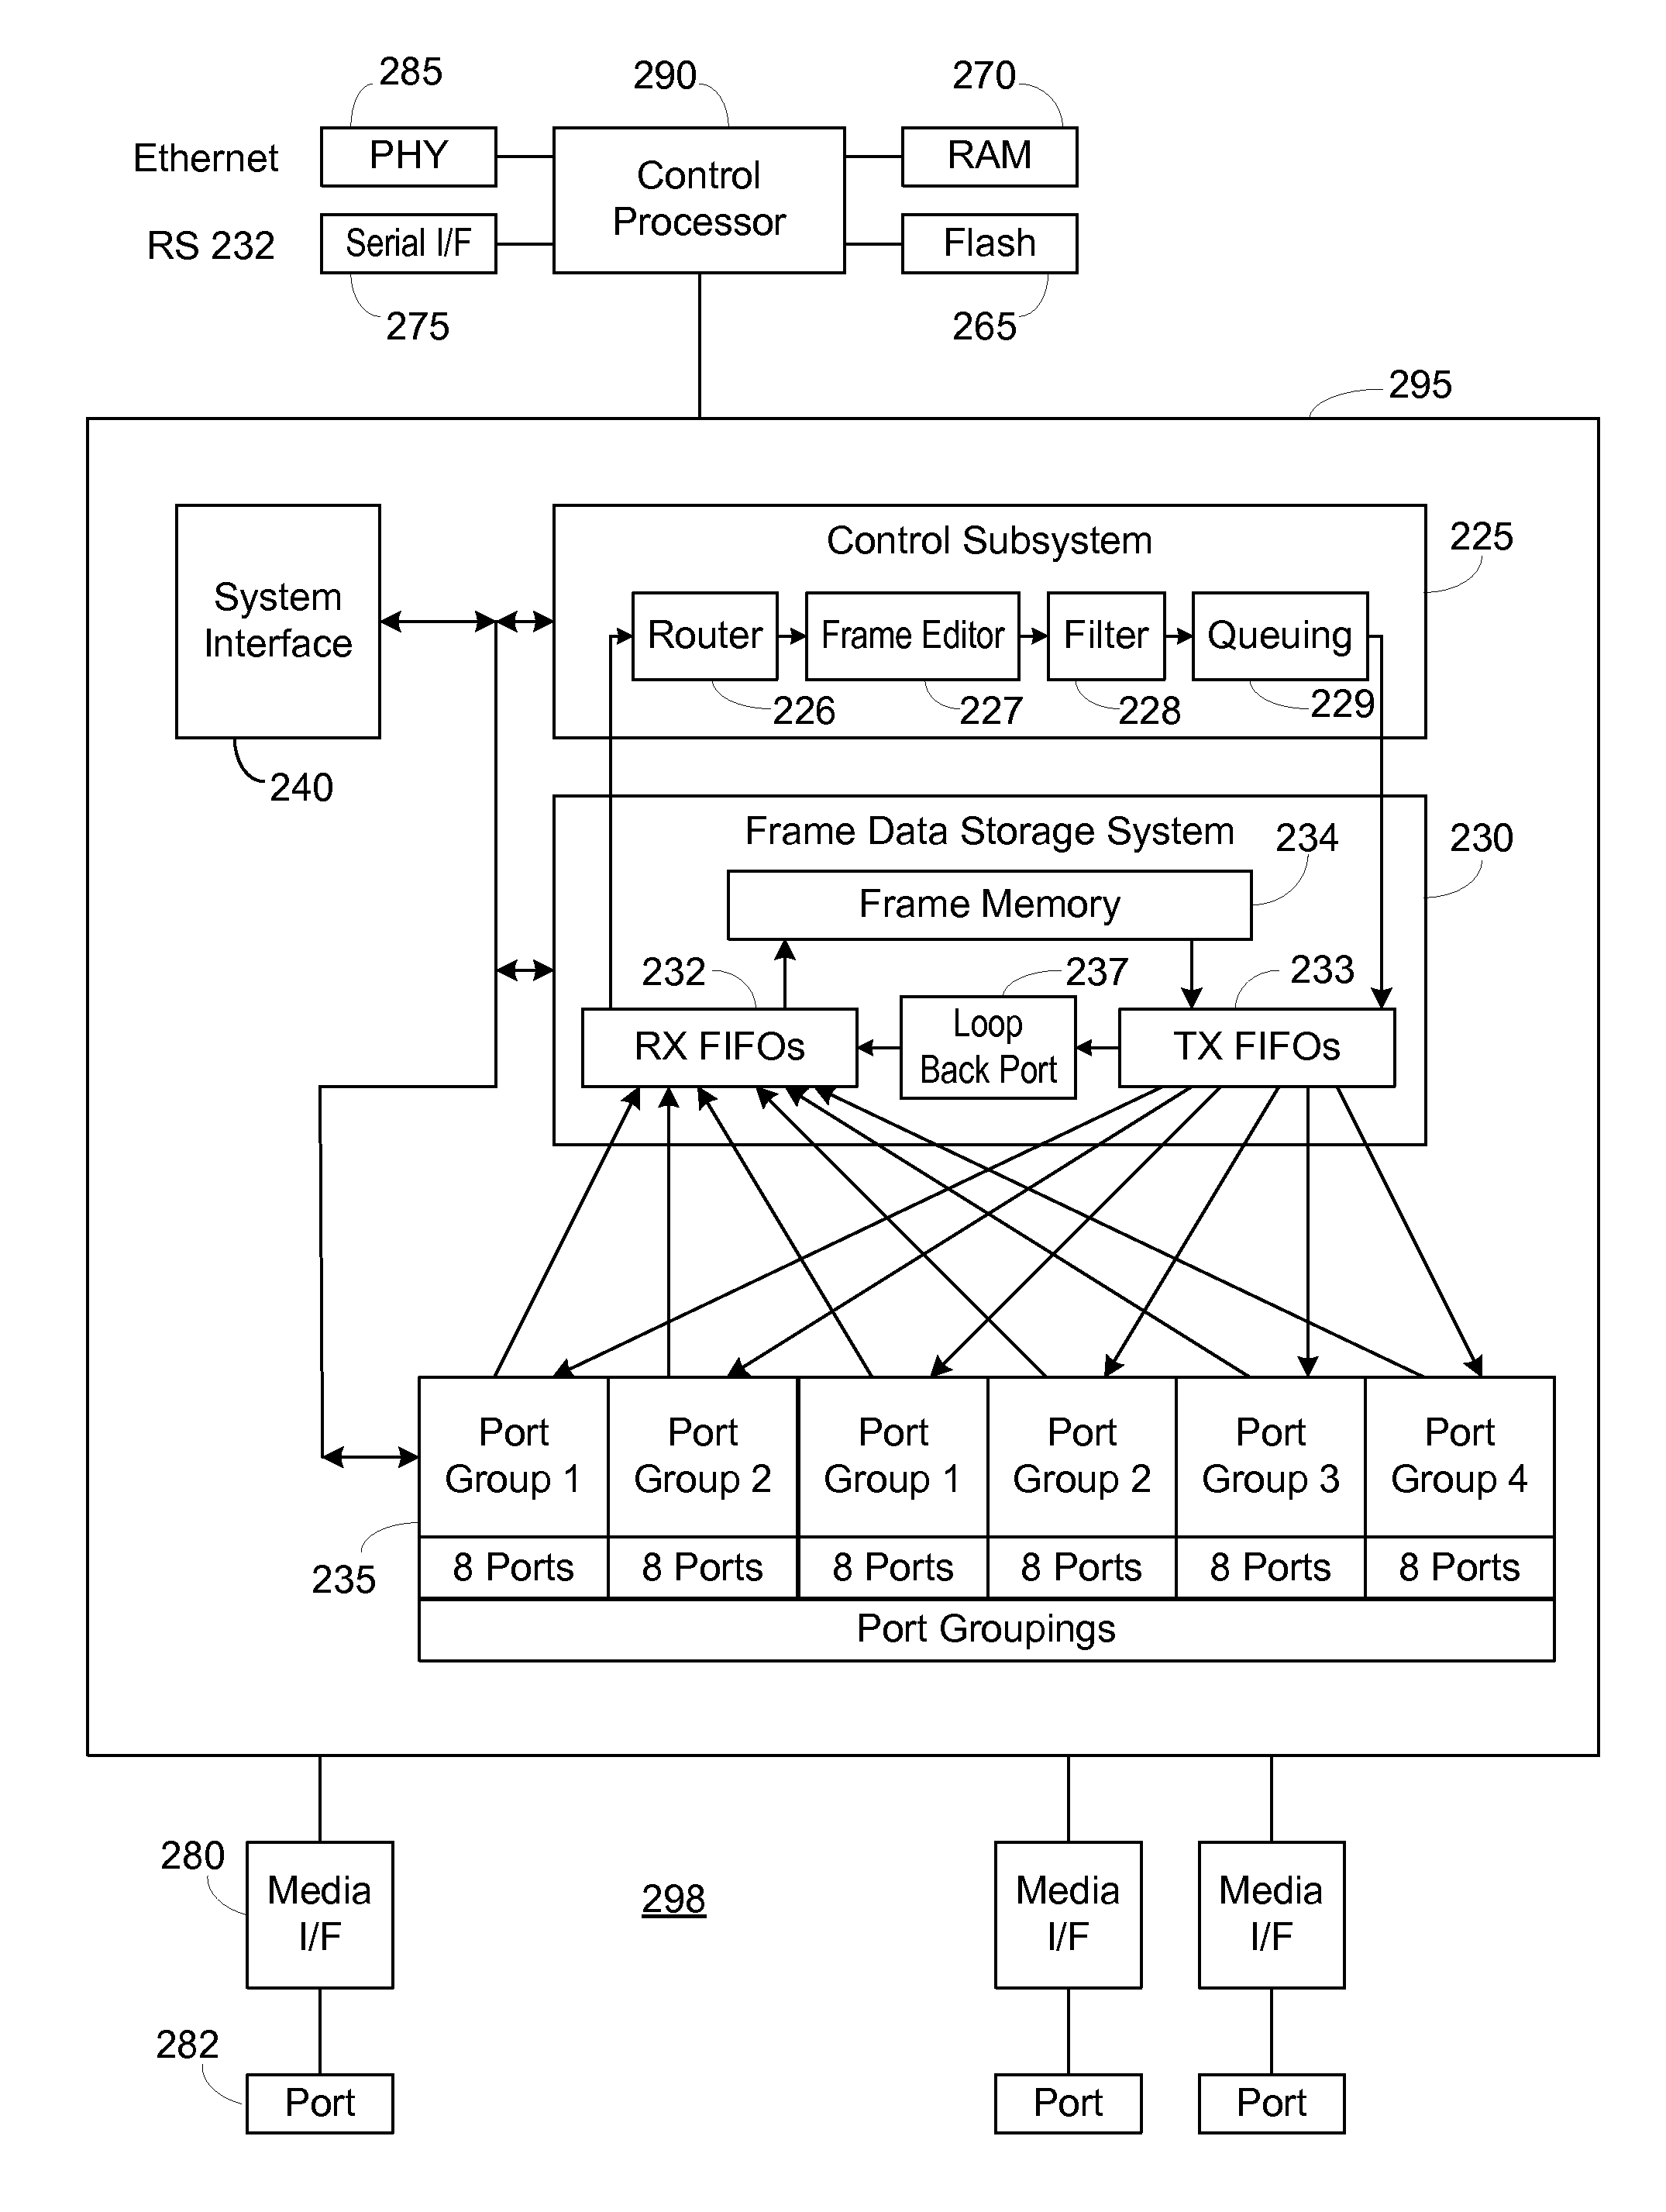 Method and Apparatus for Mirroring Frames to a Remote Diagnostic System